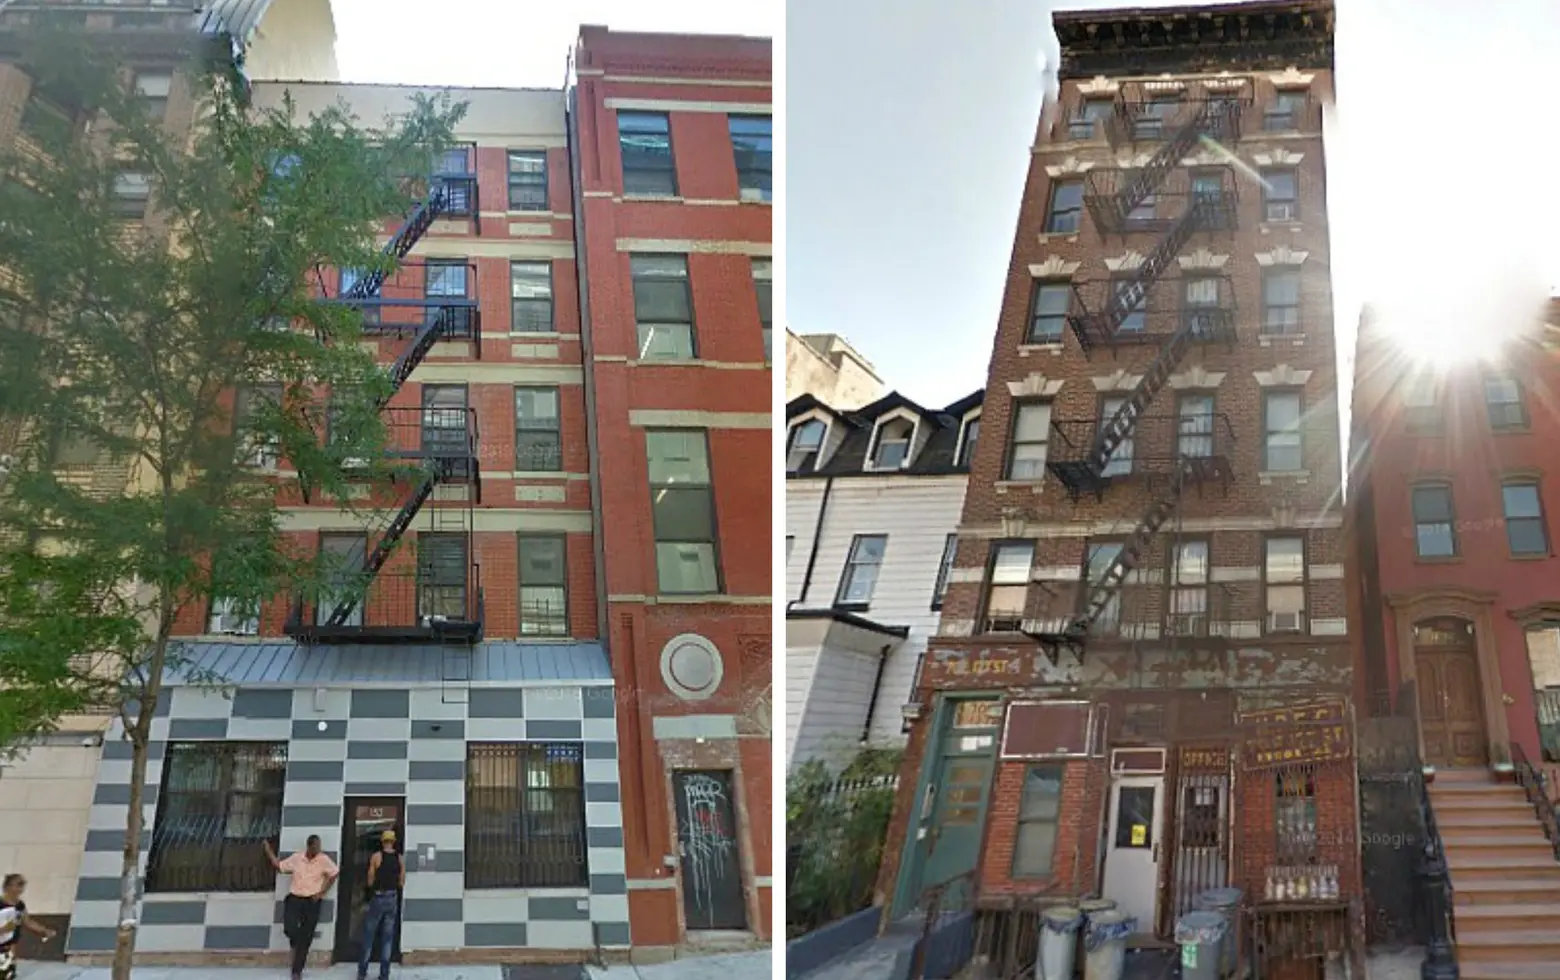 Middle-Income Housing Lottery Opens for 16 Newly Renovated Apartments in Harlem